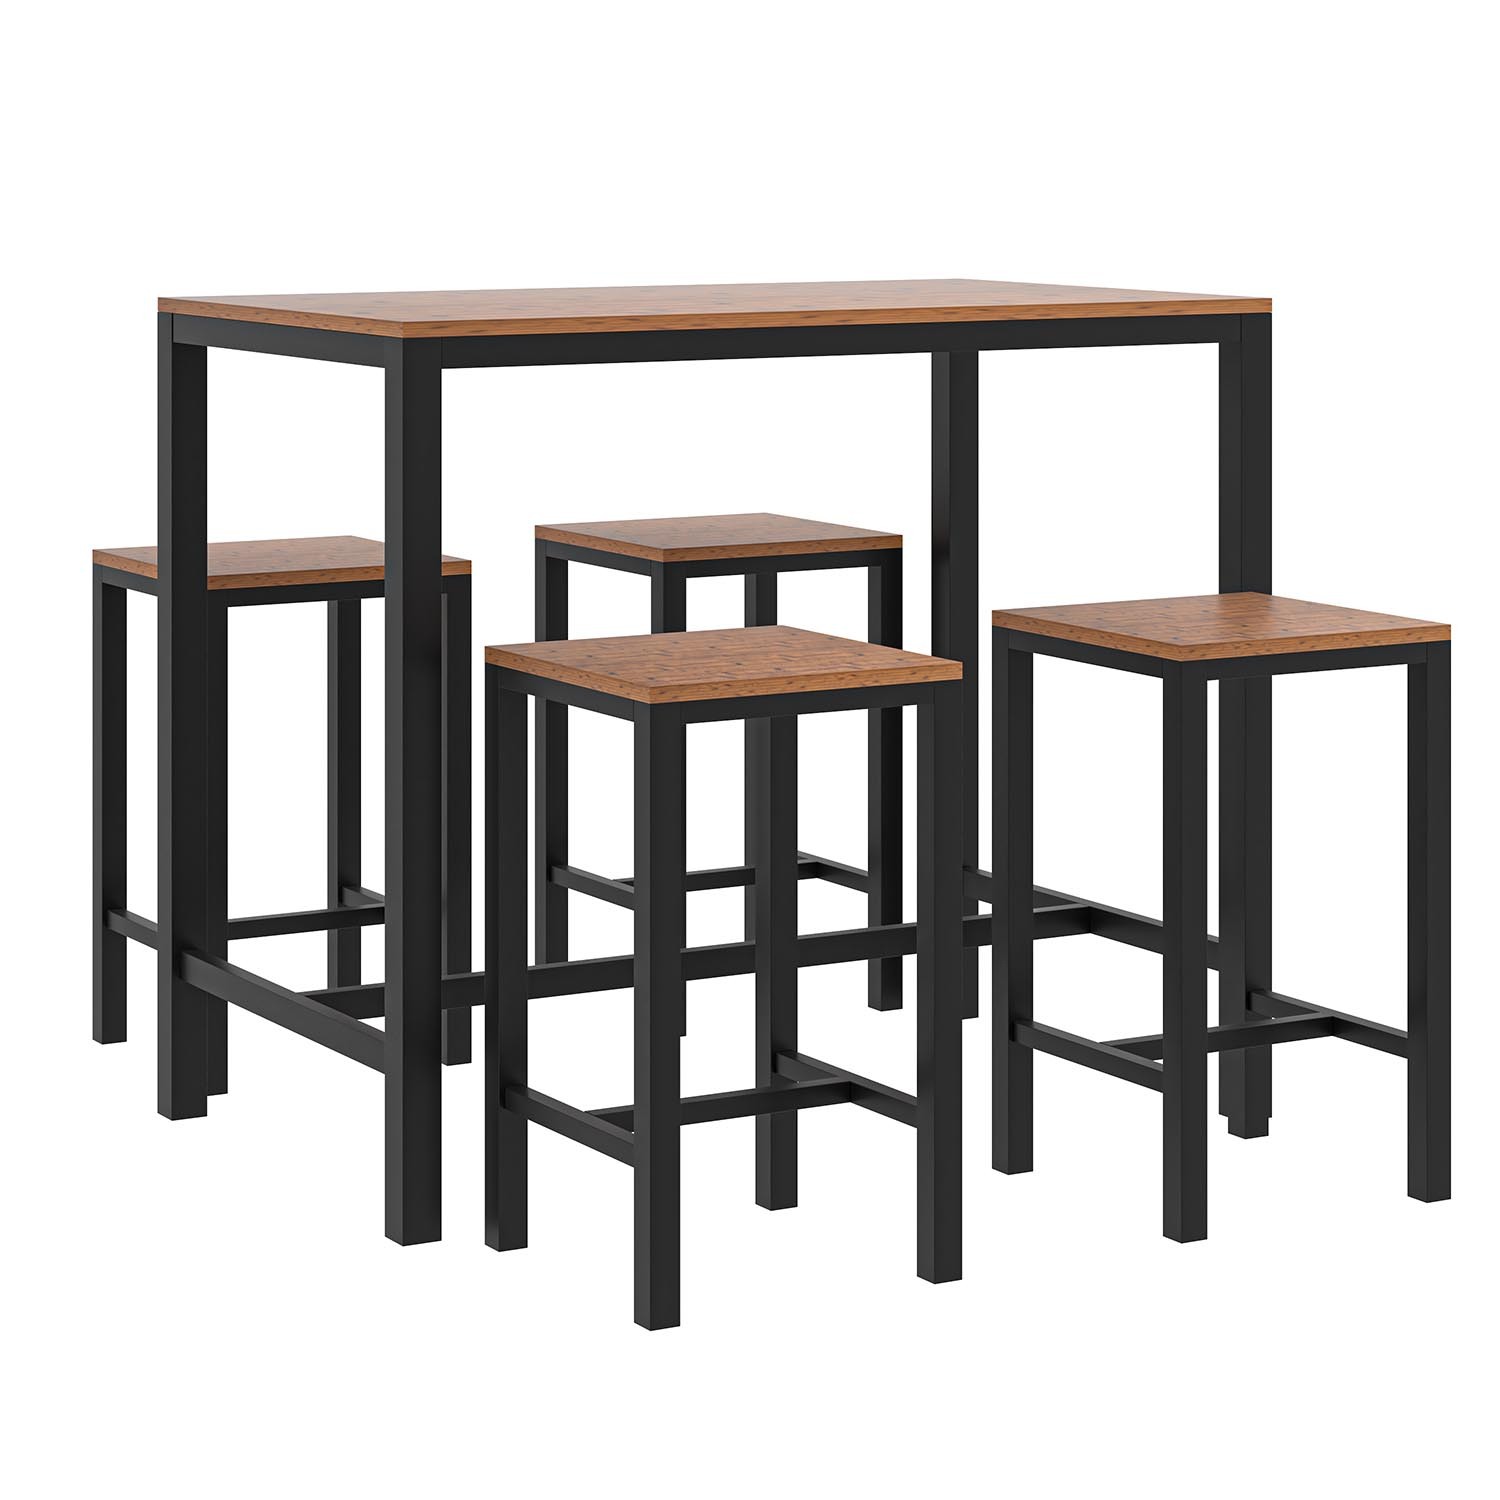 Camden 4 Seater Dining Set Brown and Black Image 5